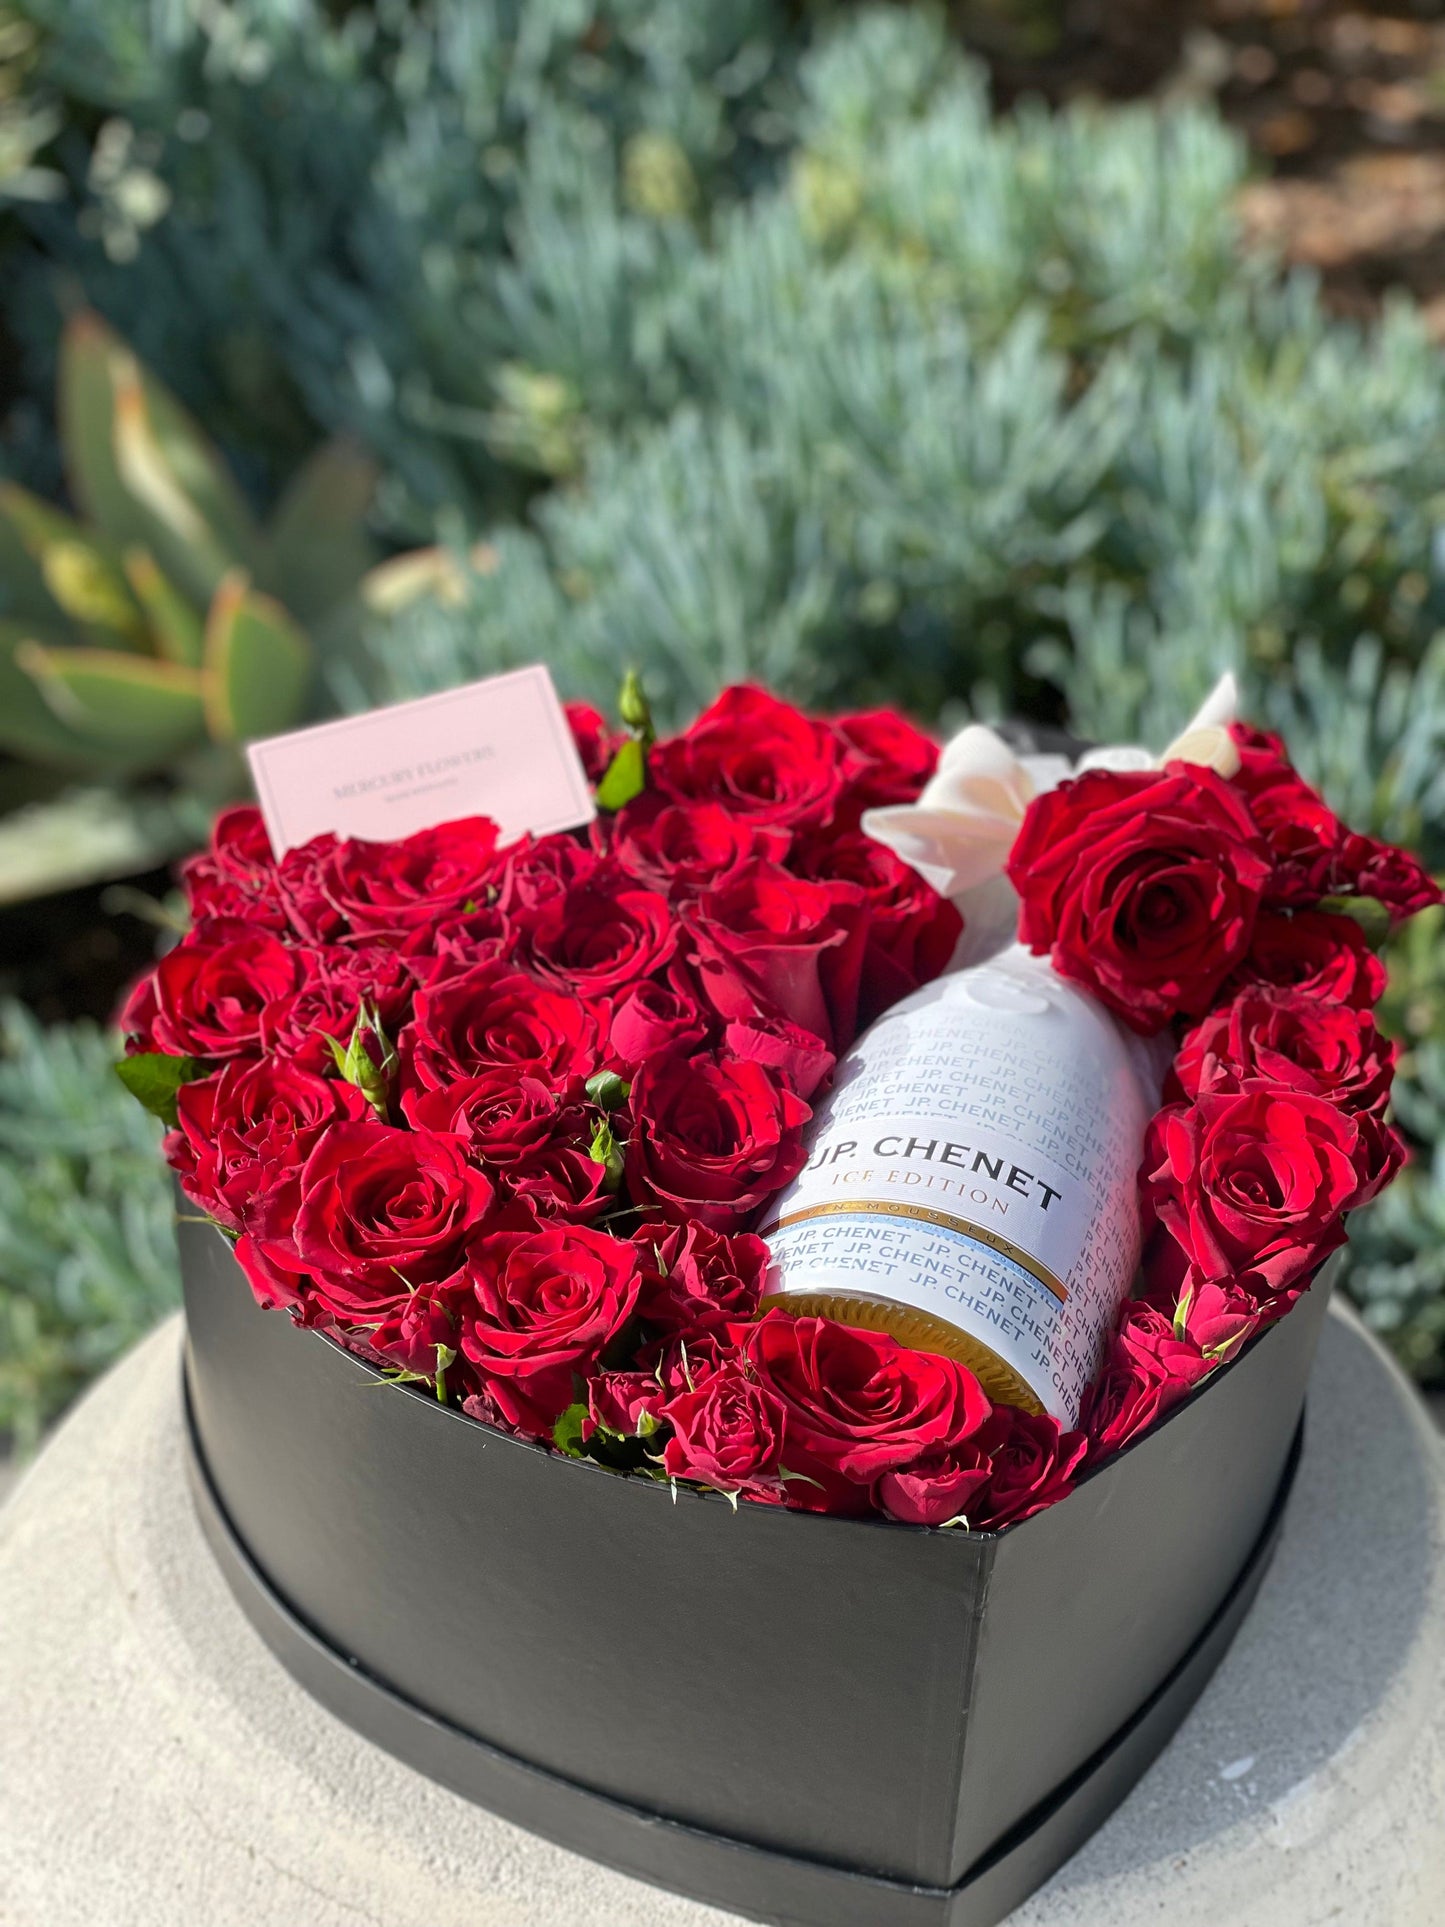 XXL Gift Heart-Shaped Box With Red Roses, Chocolate, And Champagne